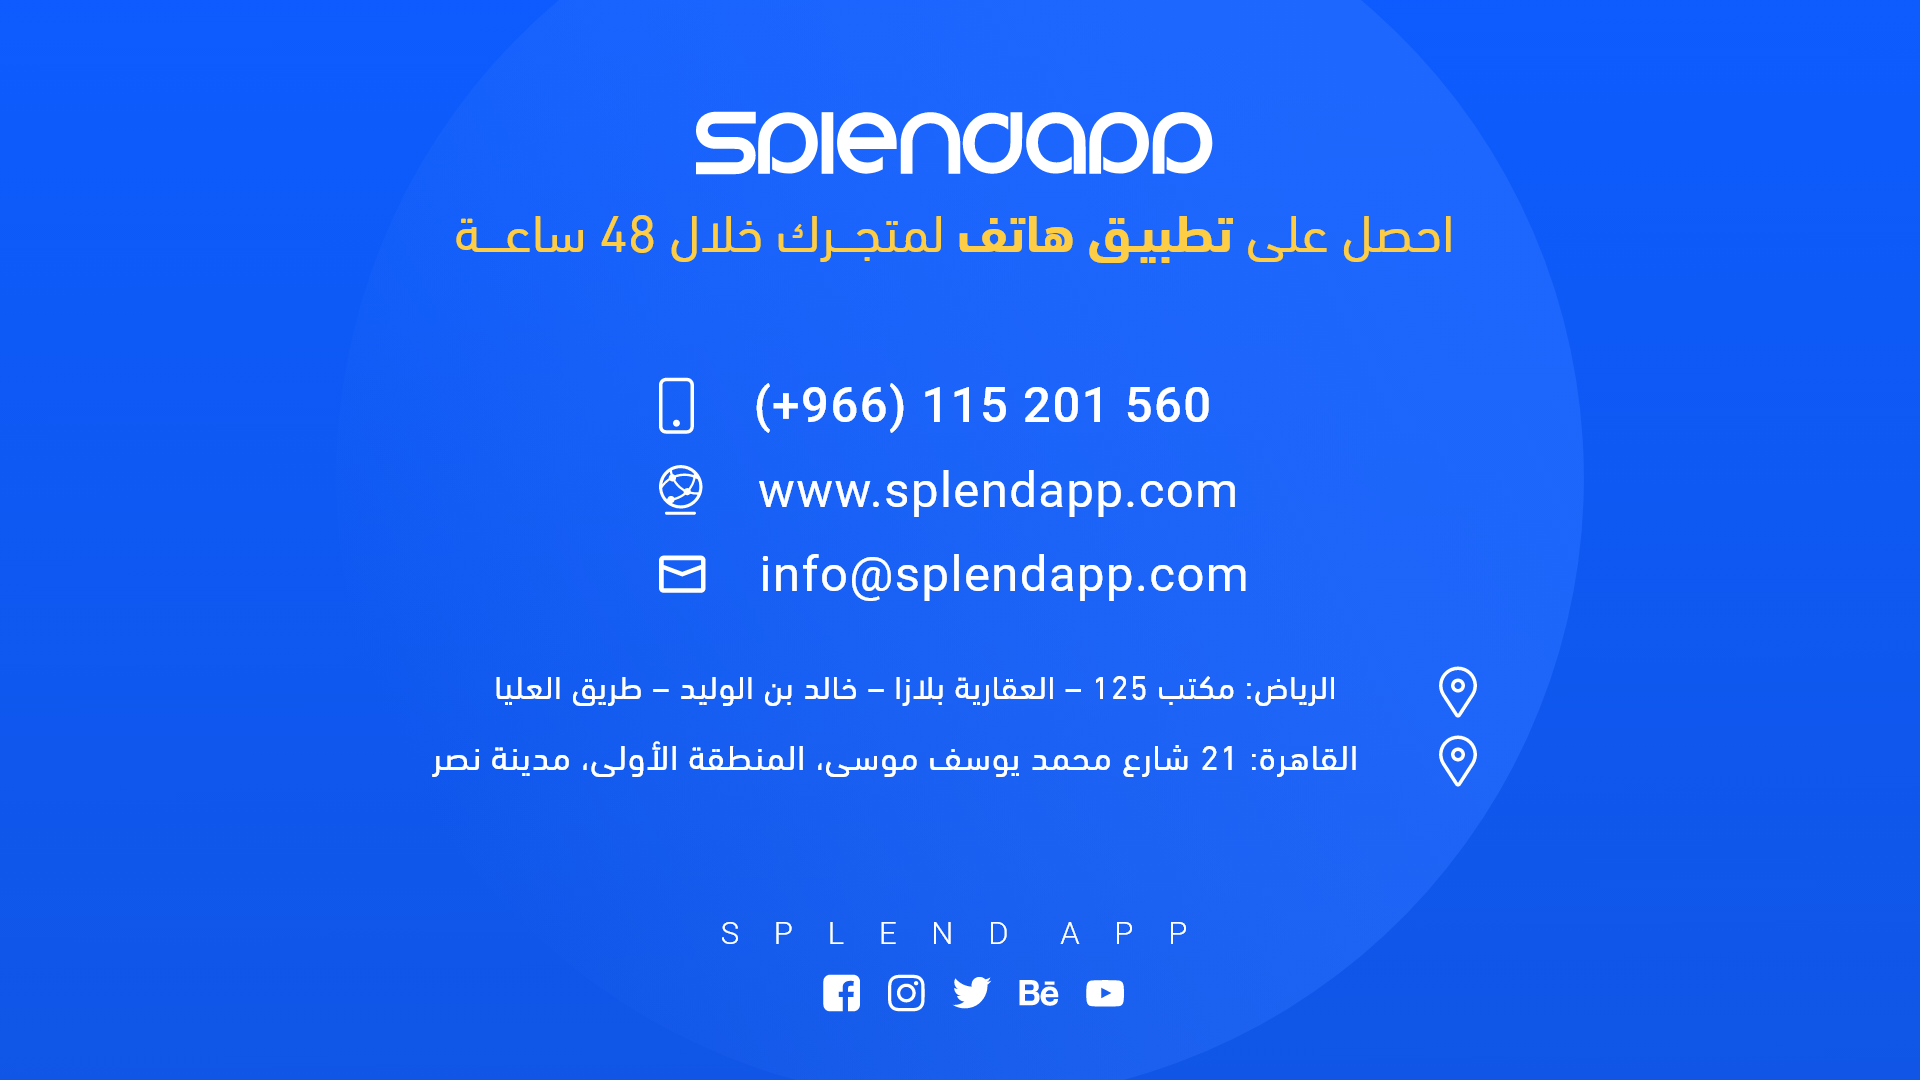 SplendApp is the super-easy solution to get a mobile application on iOS and Android in only 48hrs.